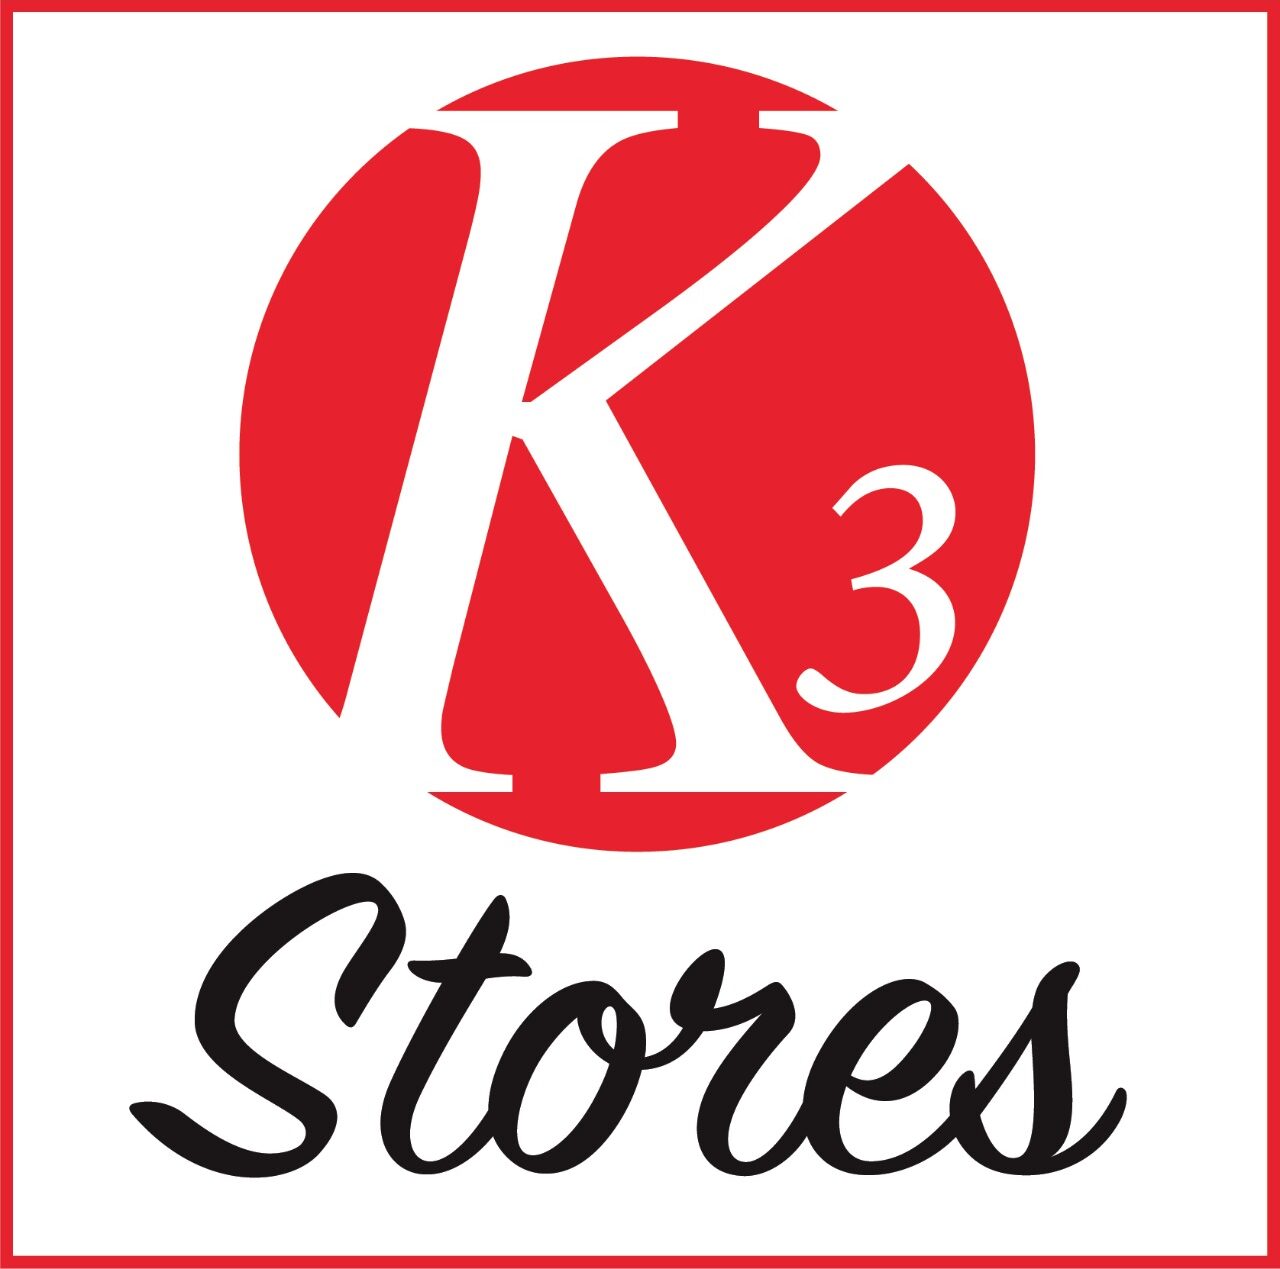 K3Stores